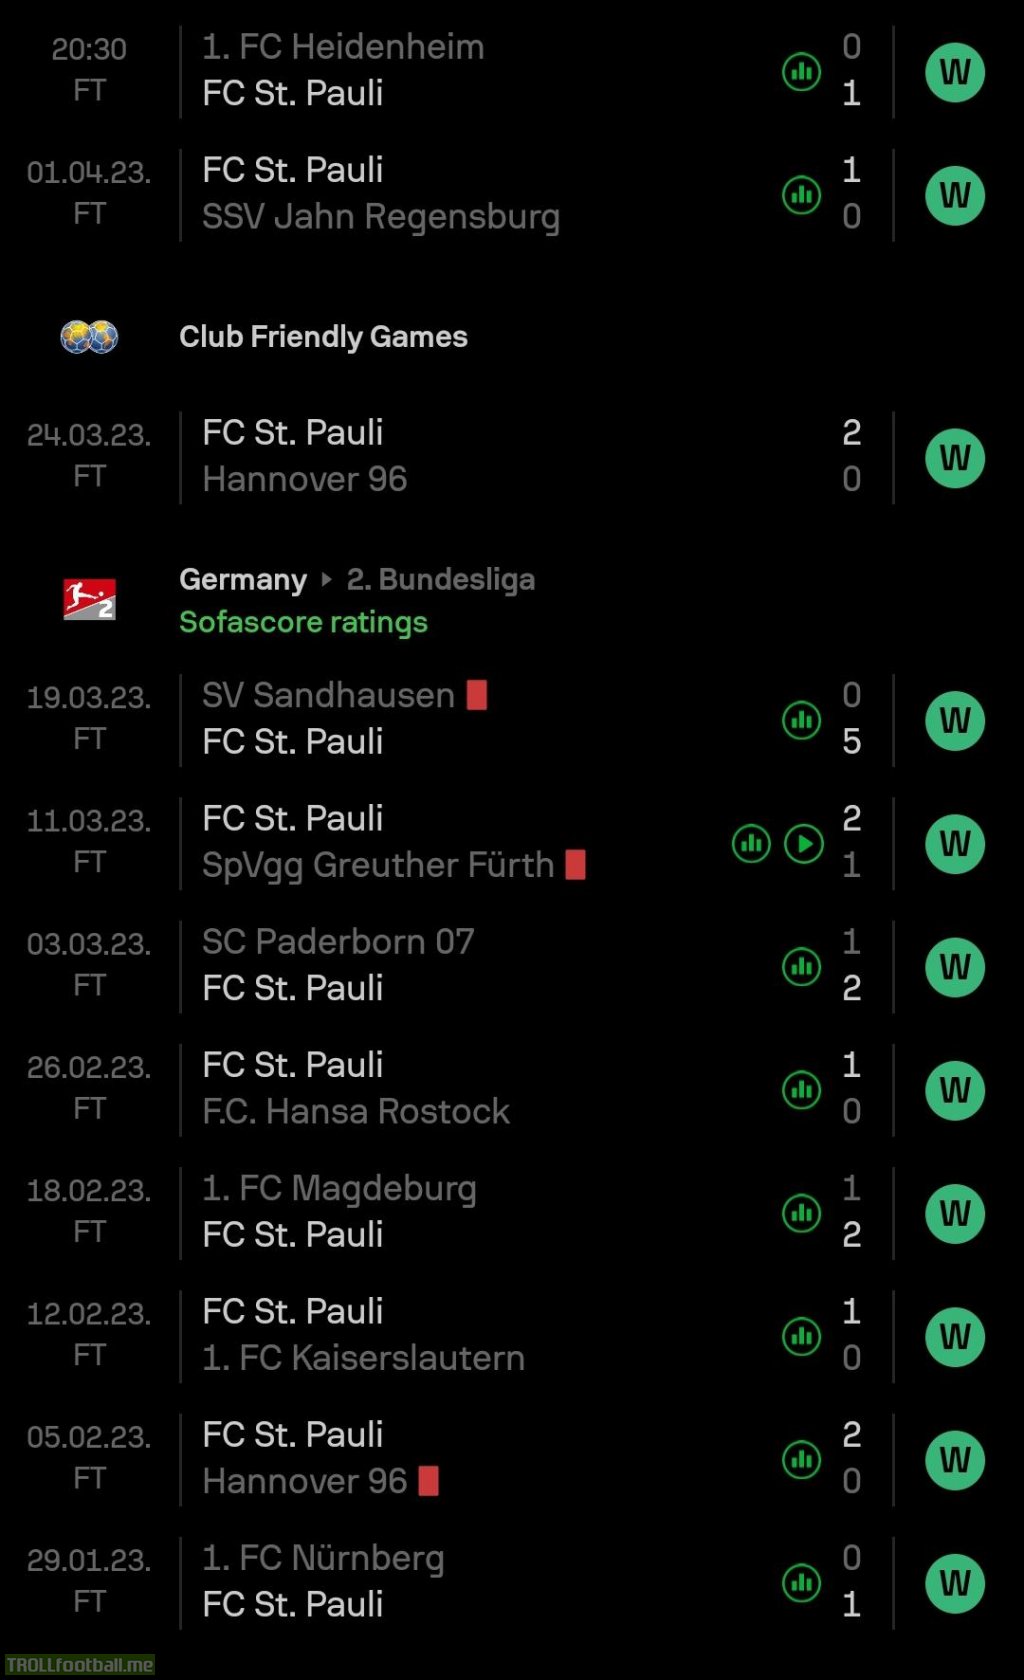 FC St. Pauli are on an insane 10-win streak in the 2. Bundesliga. After Round 17, they were on 15th place and 1 point above relegation. After Round 27, they're 4 points below 3rd place, which leads to promotion play-offs.